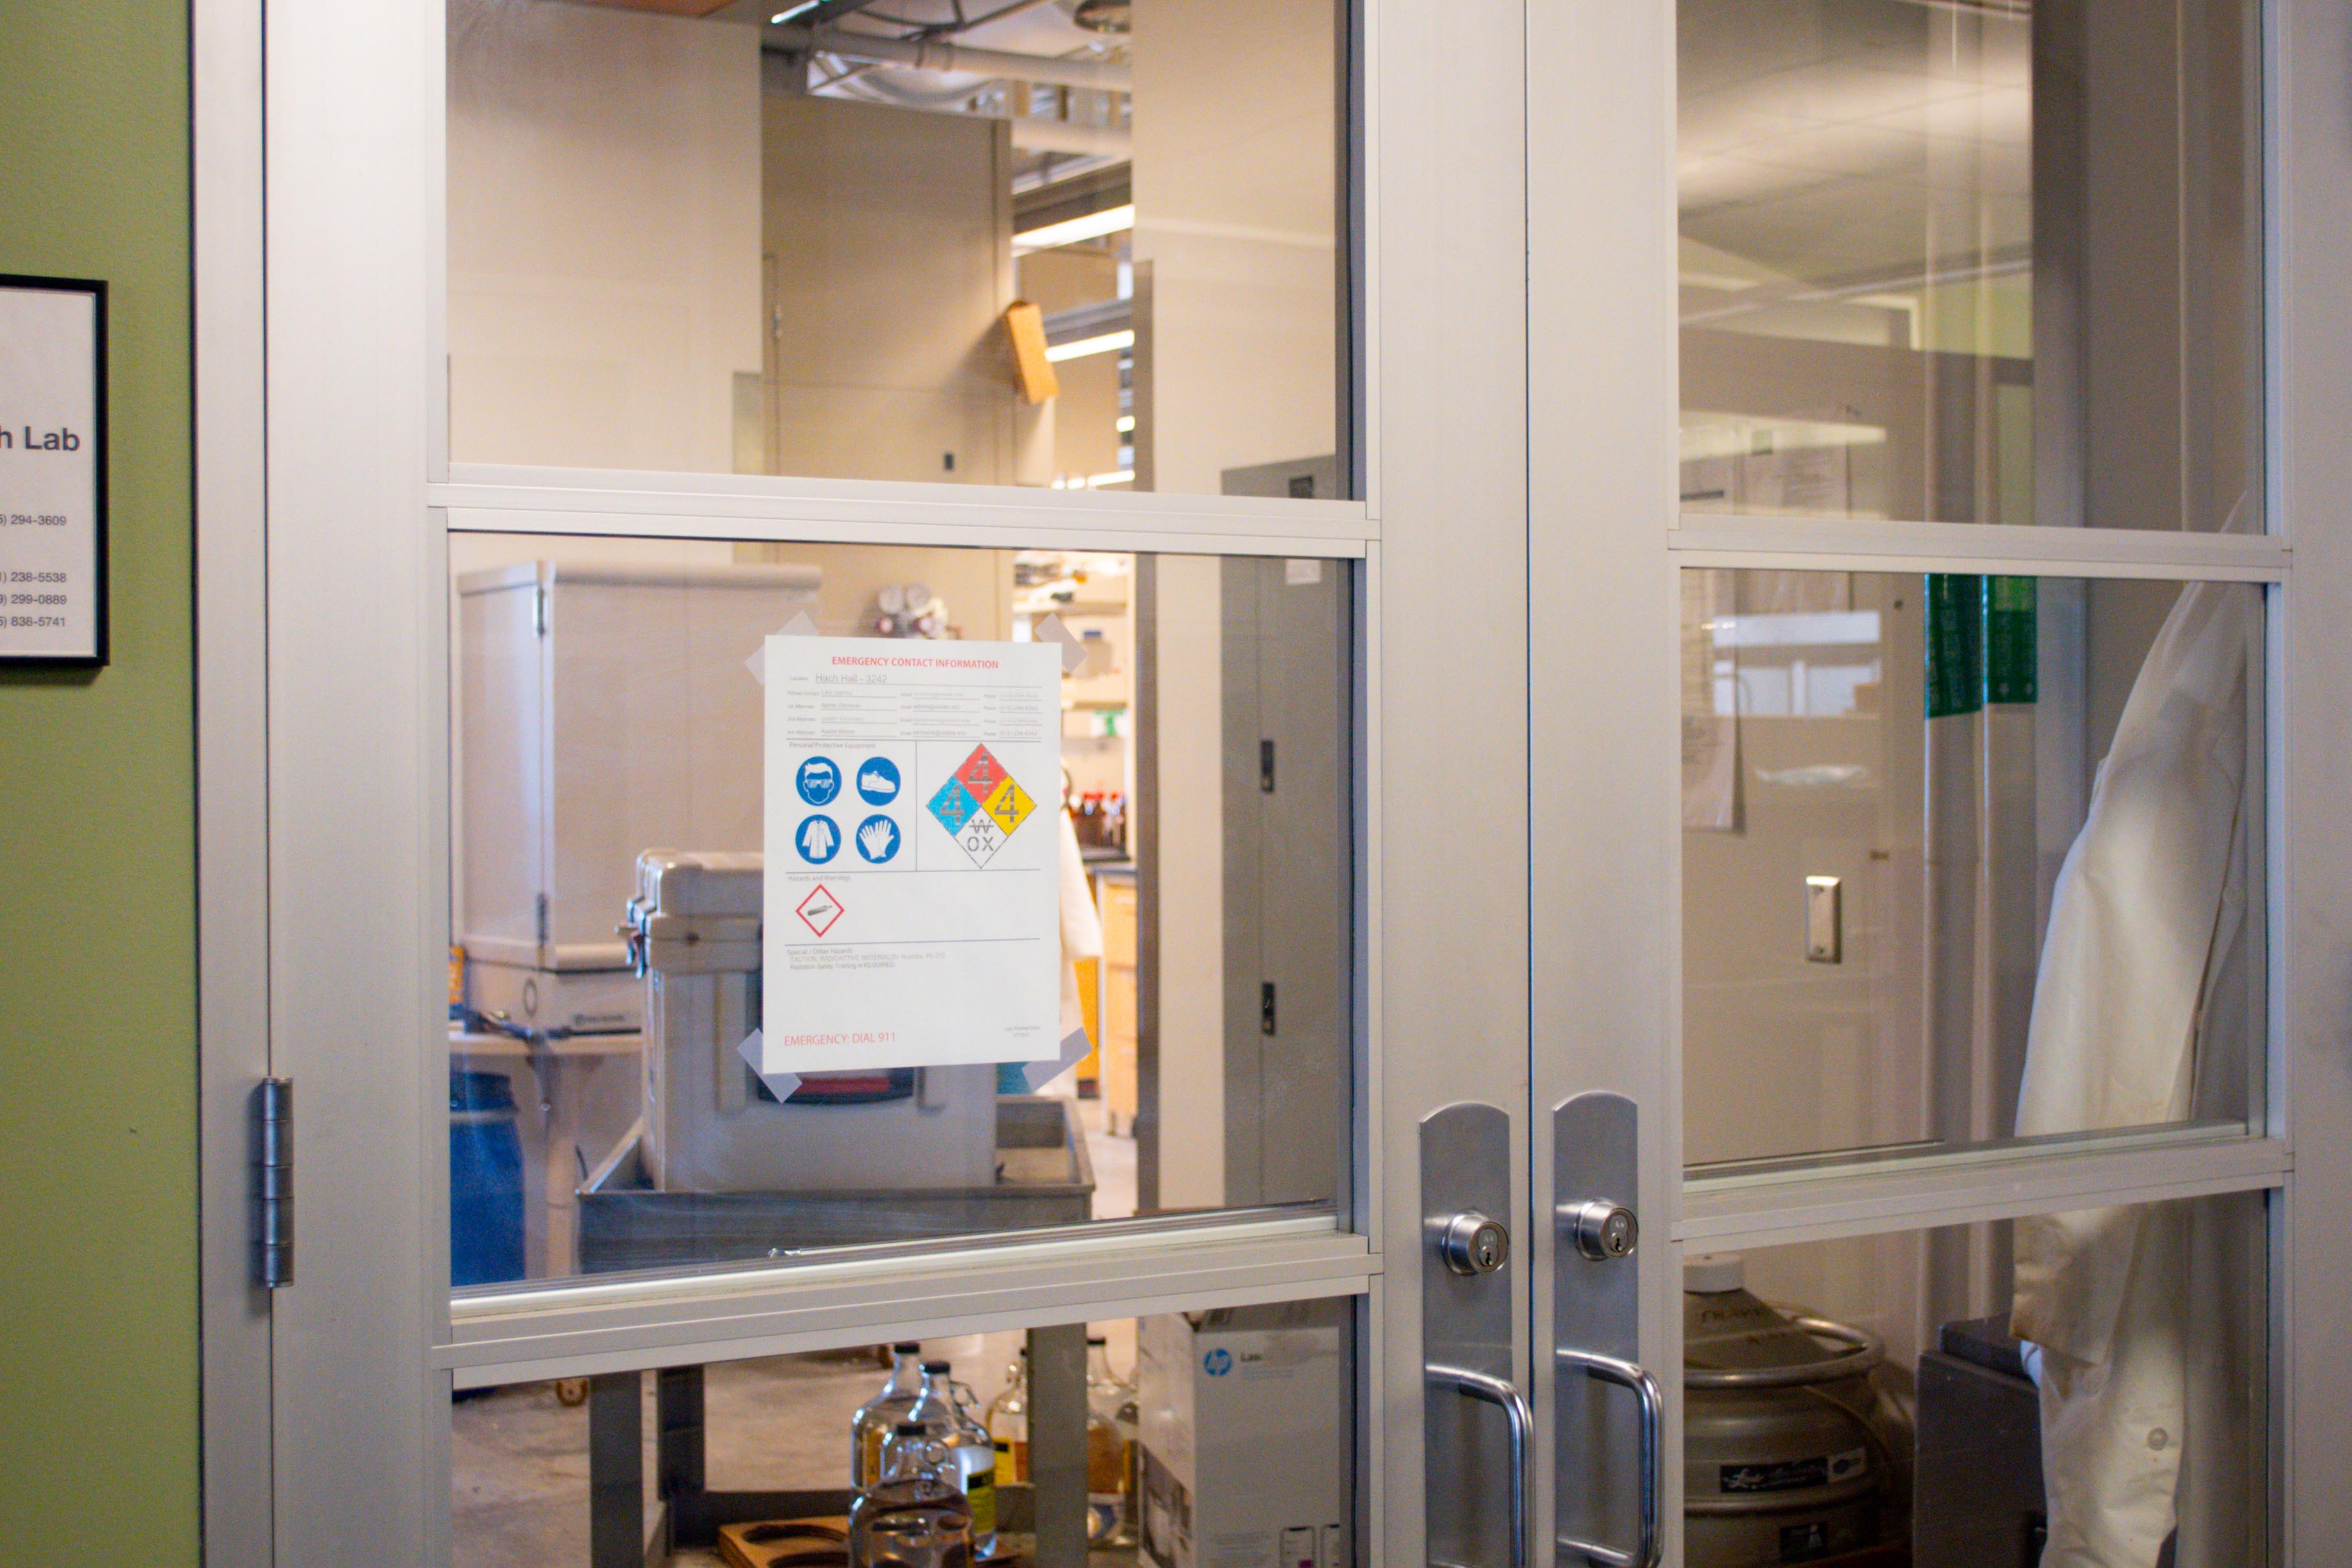 Photo of a research laboratory entrance with hazard communication sign posted on the door.